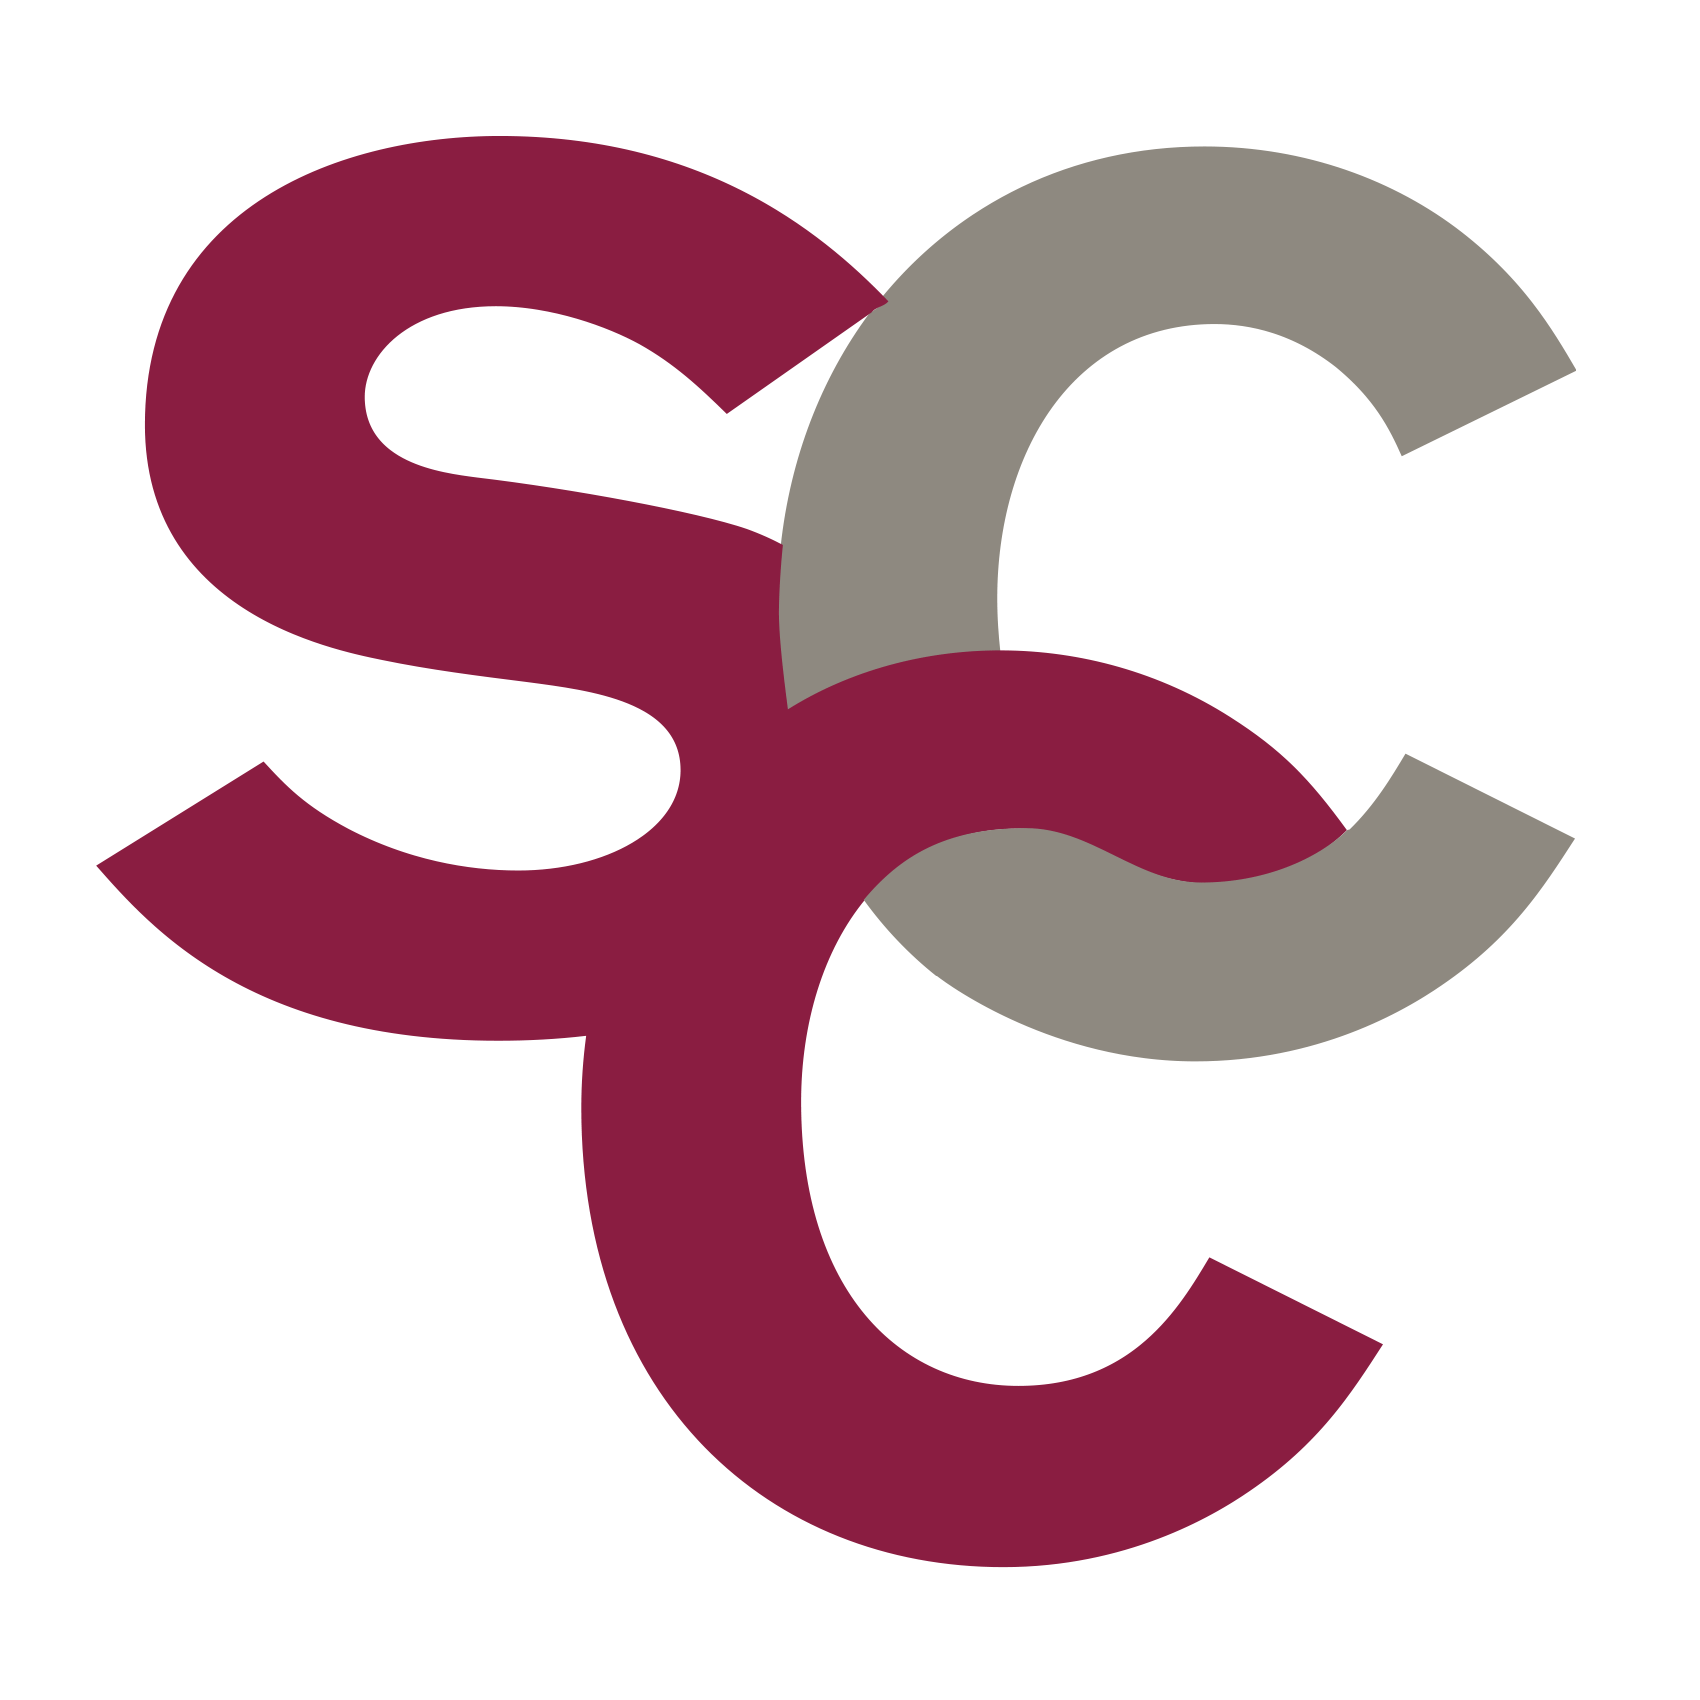 Maroon, grey and white graphic with the letters SCC.